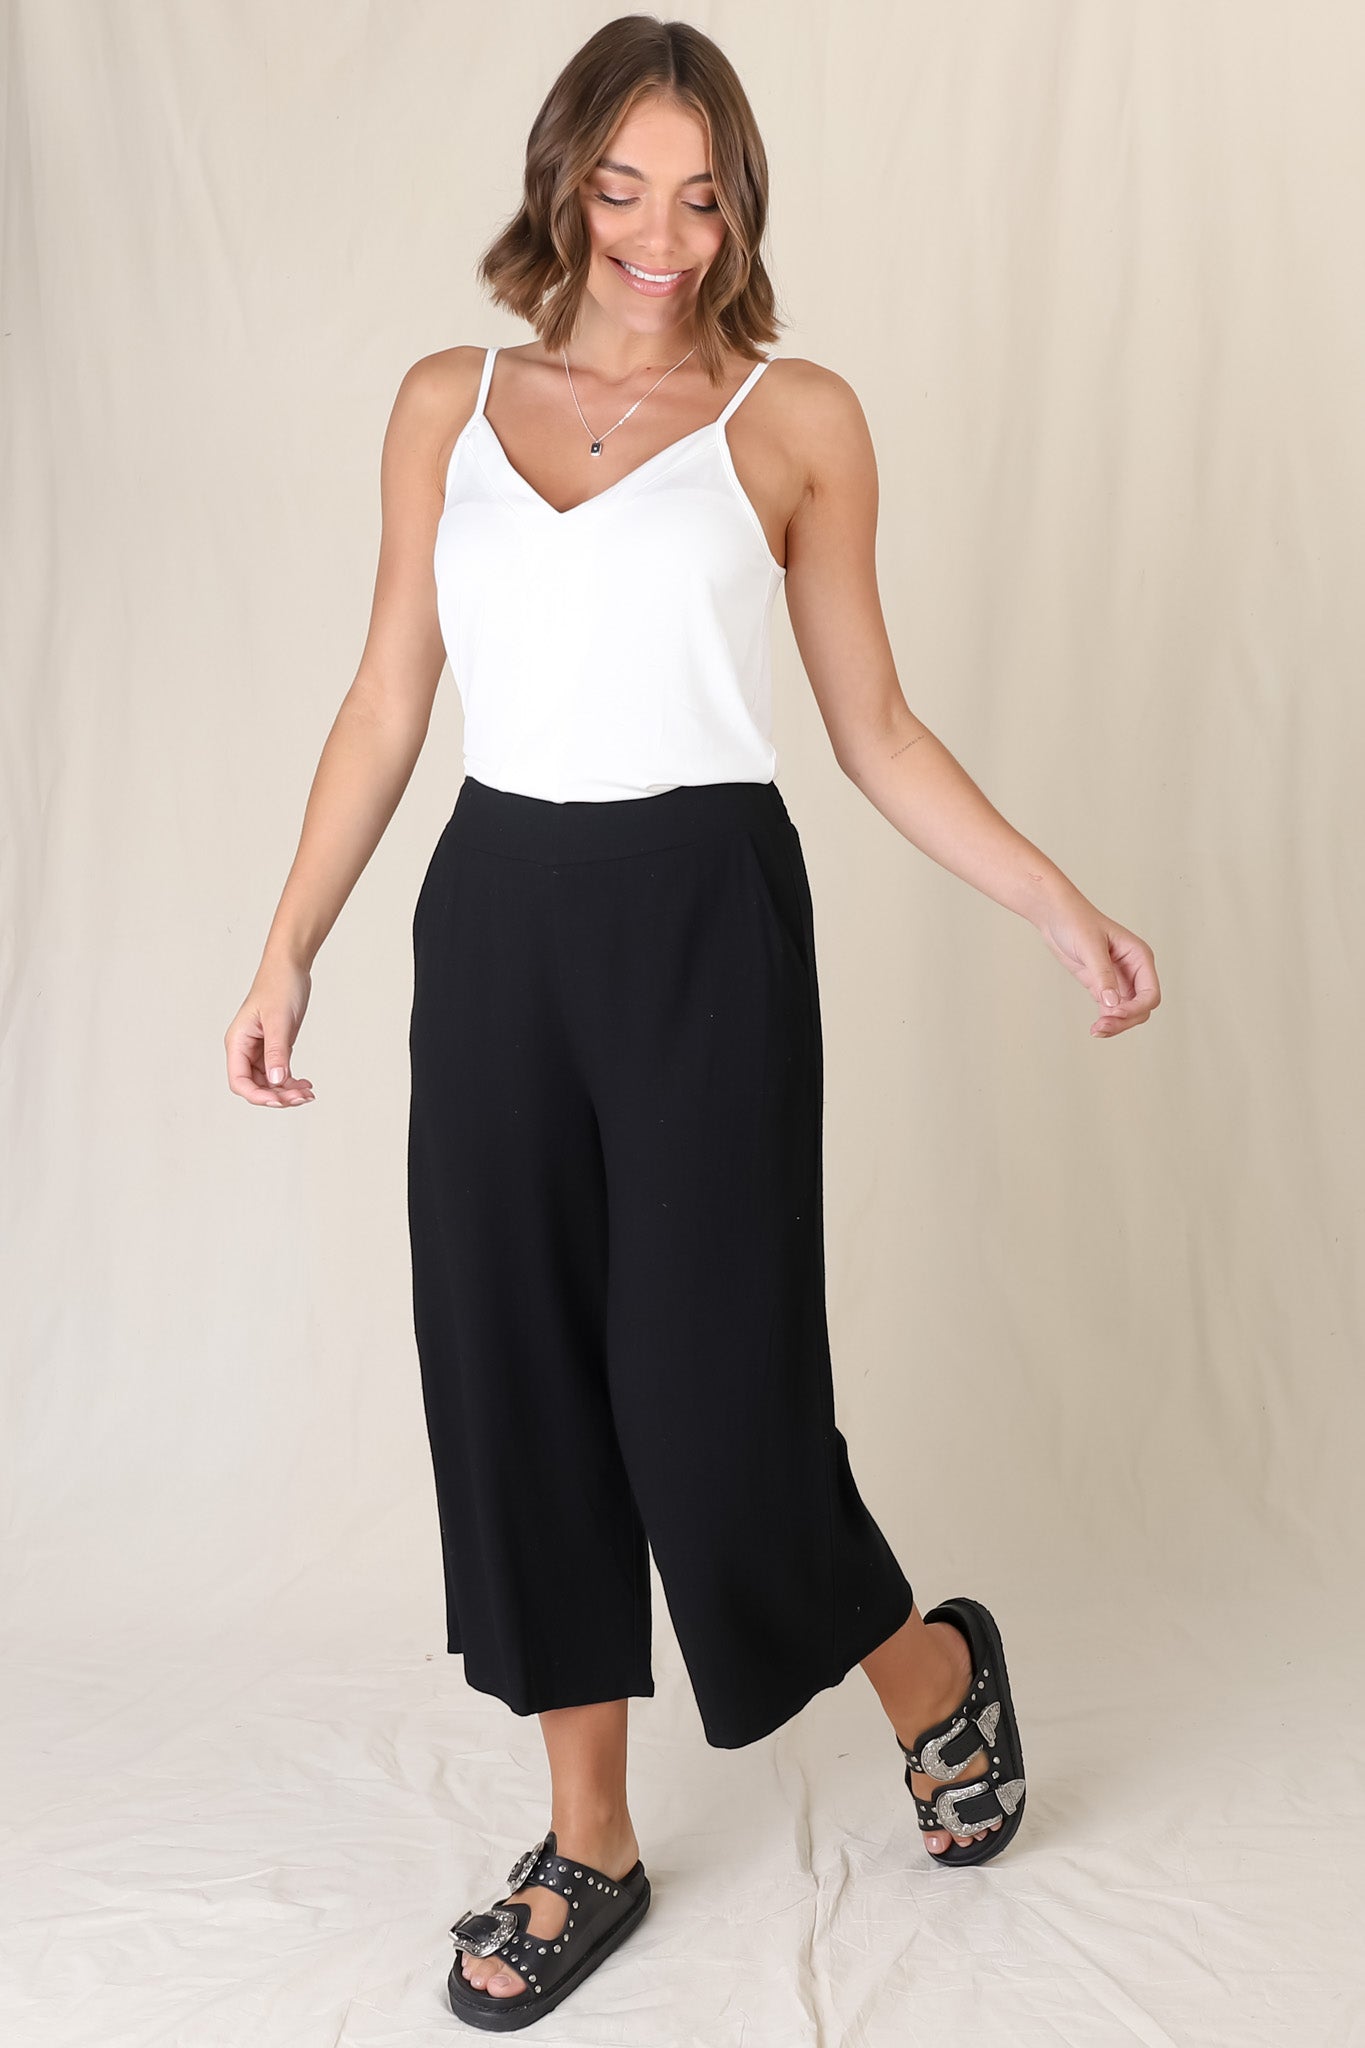 Wyatt Pants - Linen Blend 3/4 Cropped Pants with Pockets in Black